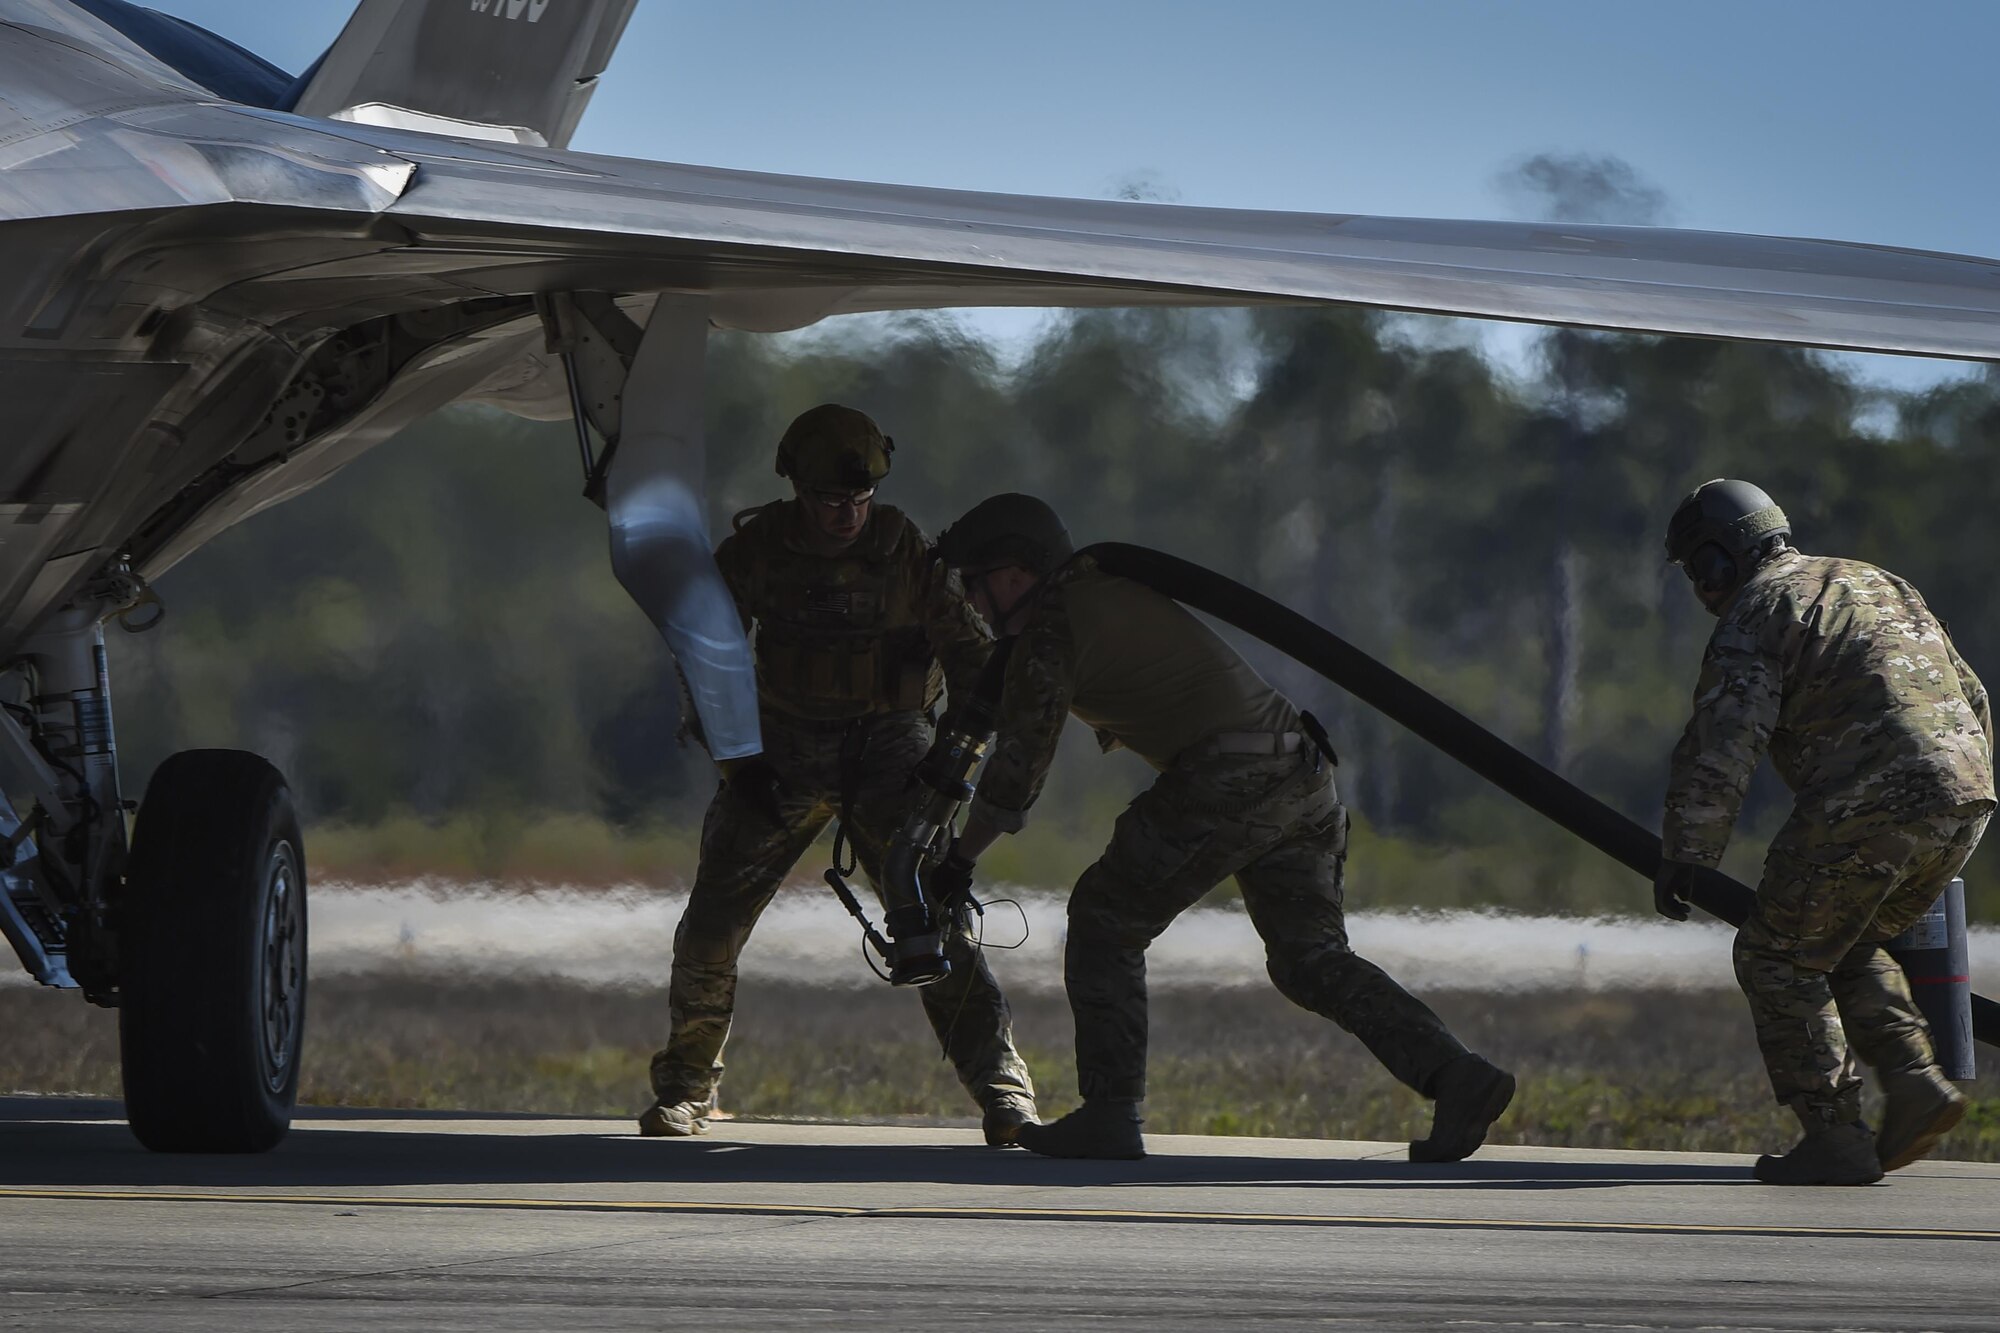 Forward area refueling point Airmen with the 1st Special Operations Logistic Readiness Squadron prepare to connect a fuel hose to an F-22 Raptor during a FARP operation at Hurlburt Field, Fla., Feb. 26, 2017. FARP Airmen perform covert nighttime refueling operations in deployed locations where fueling points are not accessible or when air-to-air refueling is not possible. (U.S. Air Force photo by Airman 1st Class Joseph Pick)